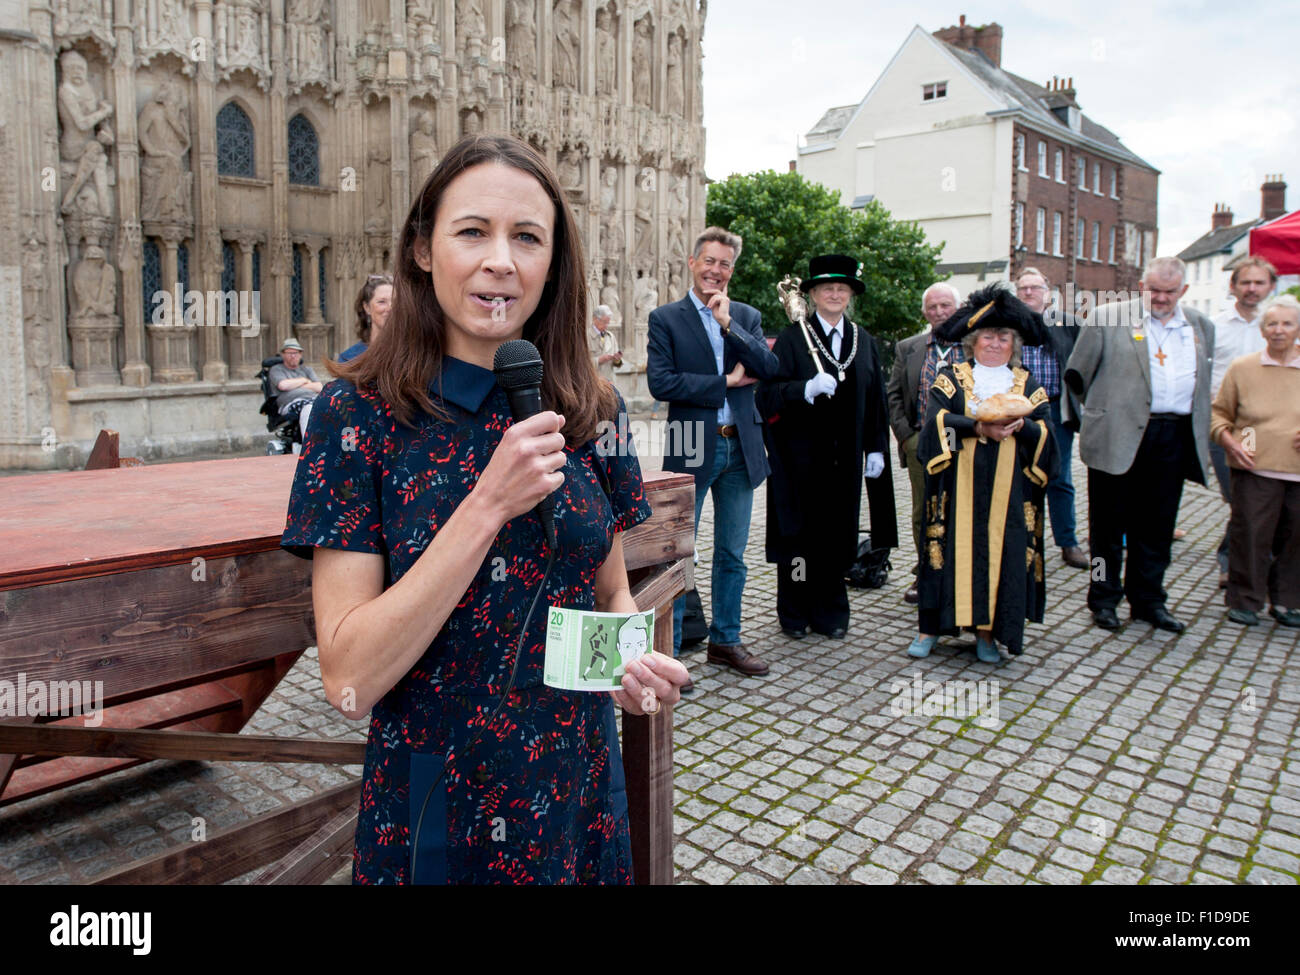 Exeter, Devon, UK. 1st September, 2015. British long-distance runner, Jo Pavey MBE, speaking during the Exeter Pound launch at Exeter Cathedral on 1st September 2015 in Exeter, England, UK Credit:  Clive Chilvers/Alamy Live News Stock Photo